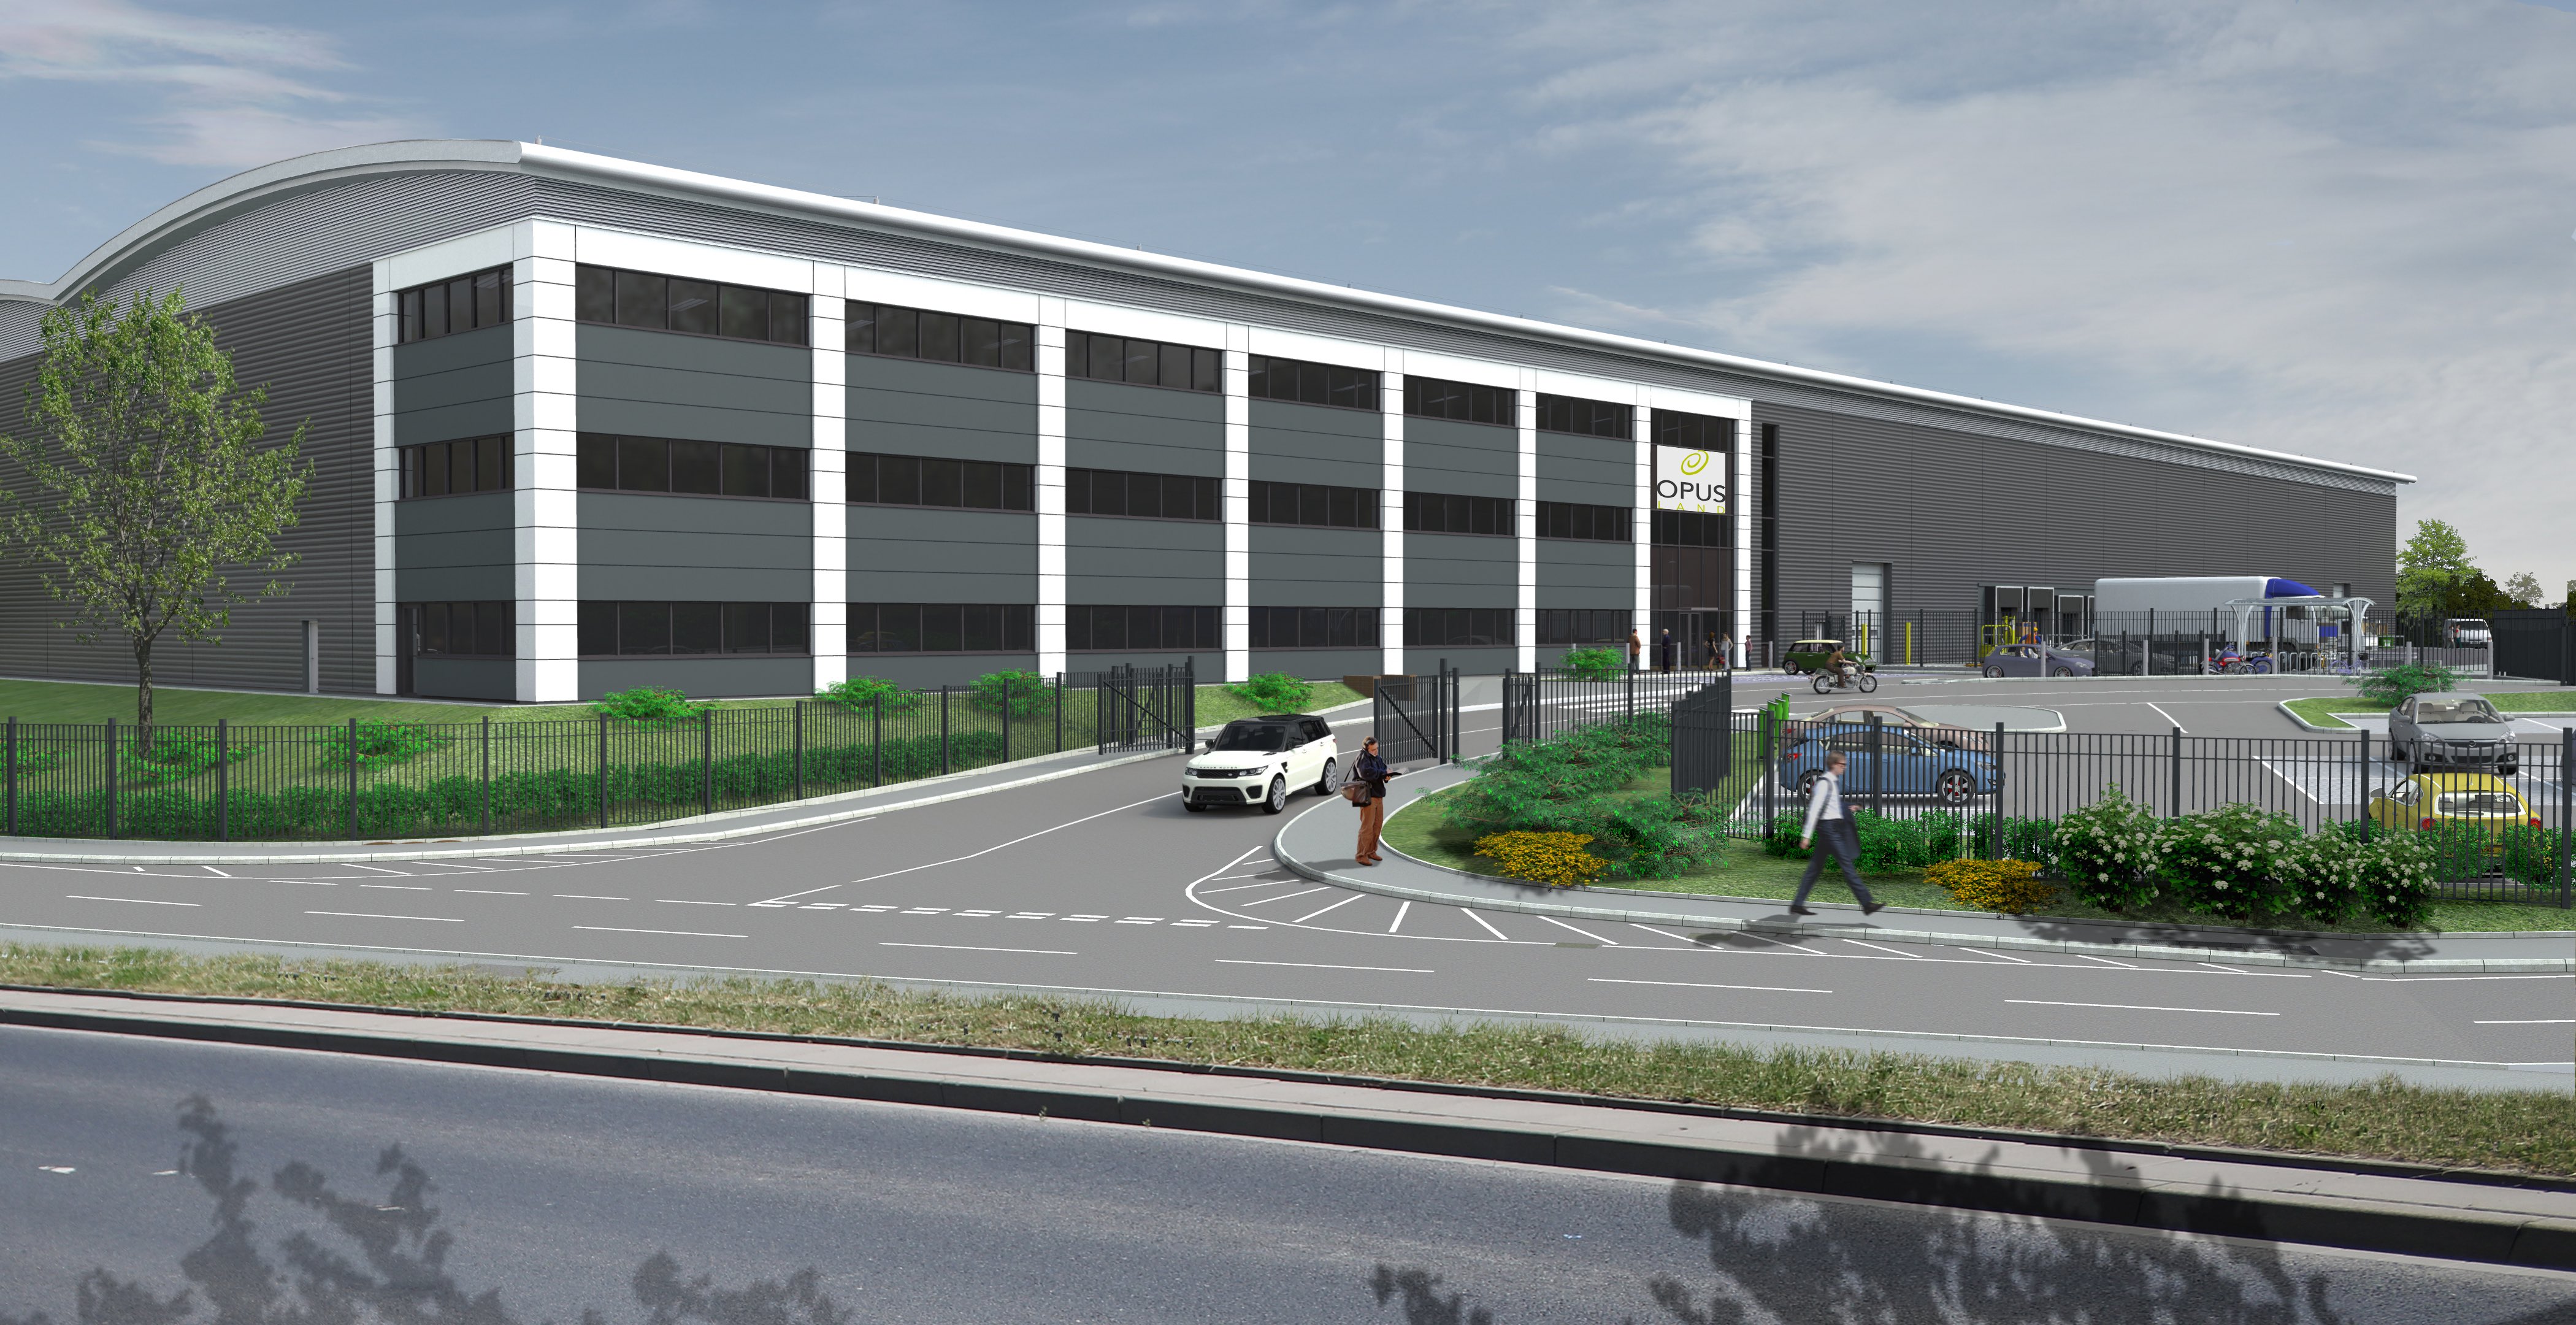 Former scrap yard to be transformed by new industrial scheme creating 200 jobs